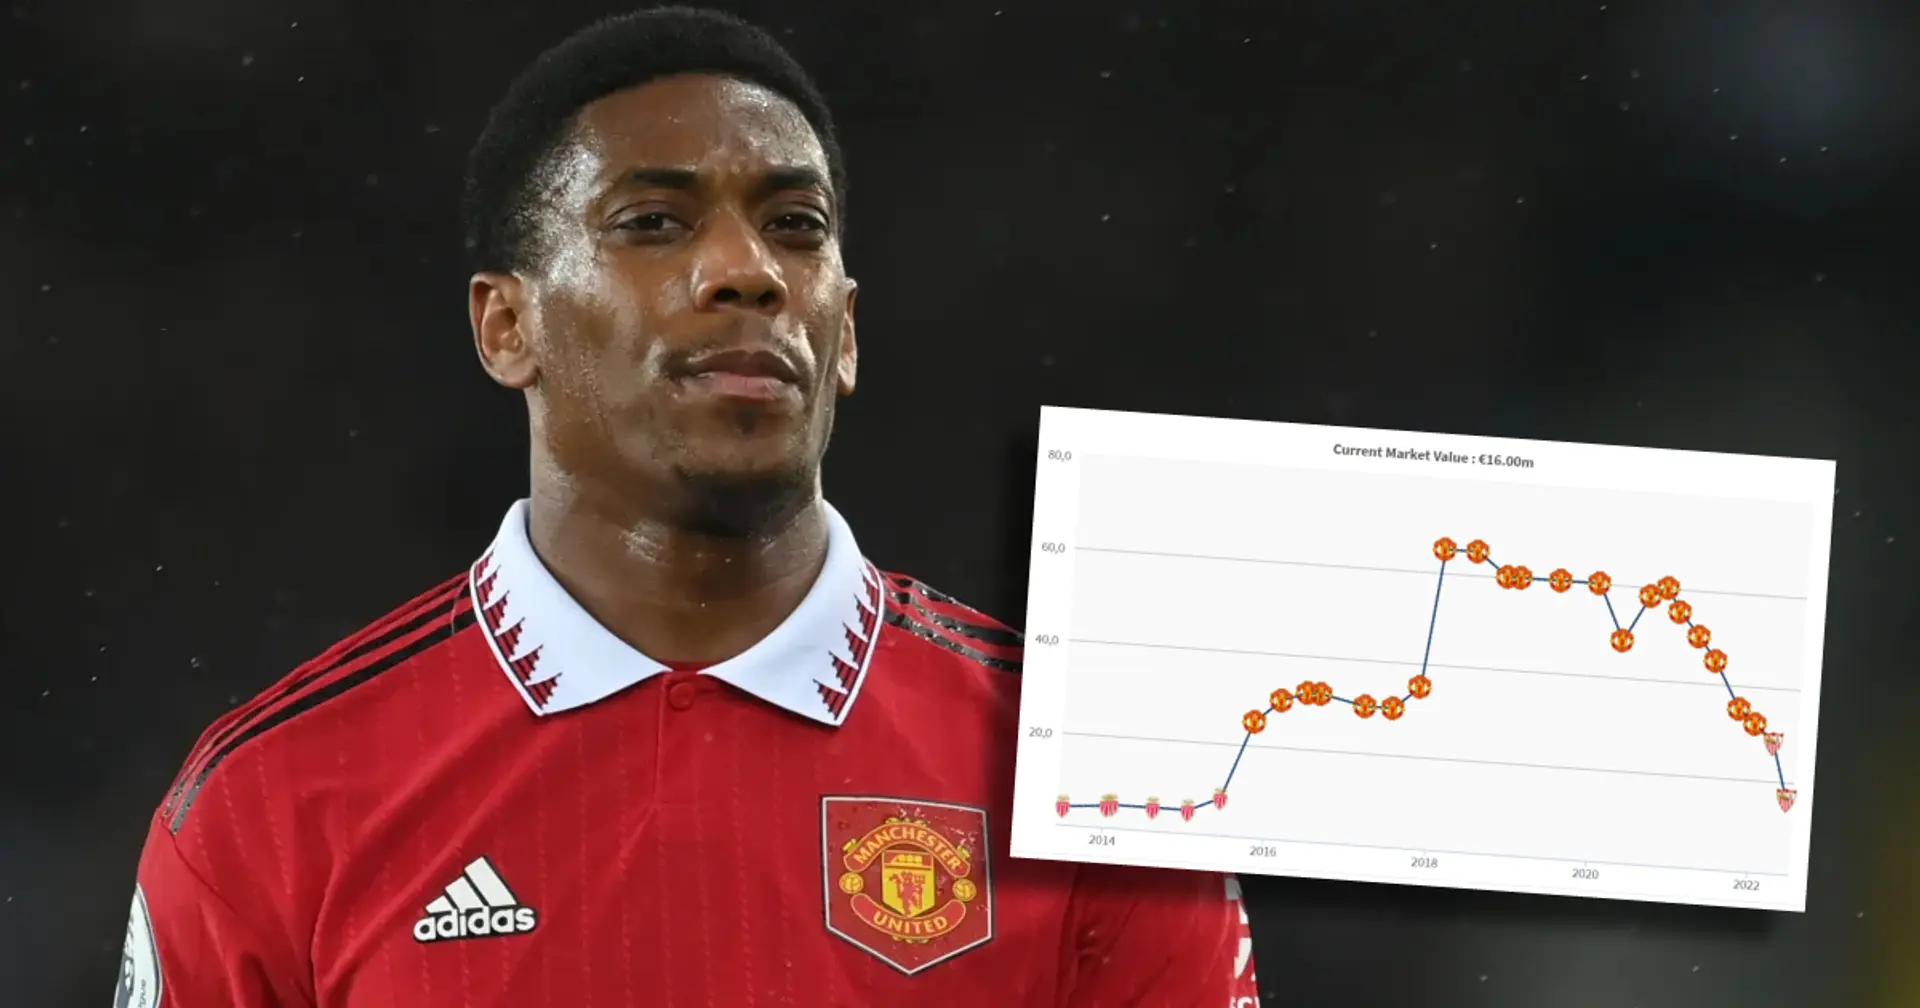 Martial reaches lowest estimated value on Transfermarkt as United player — four times less than his peak value